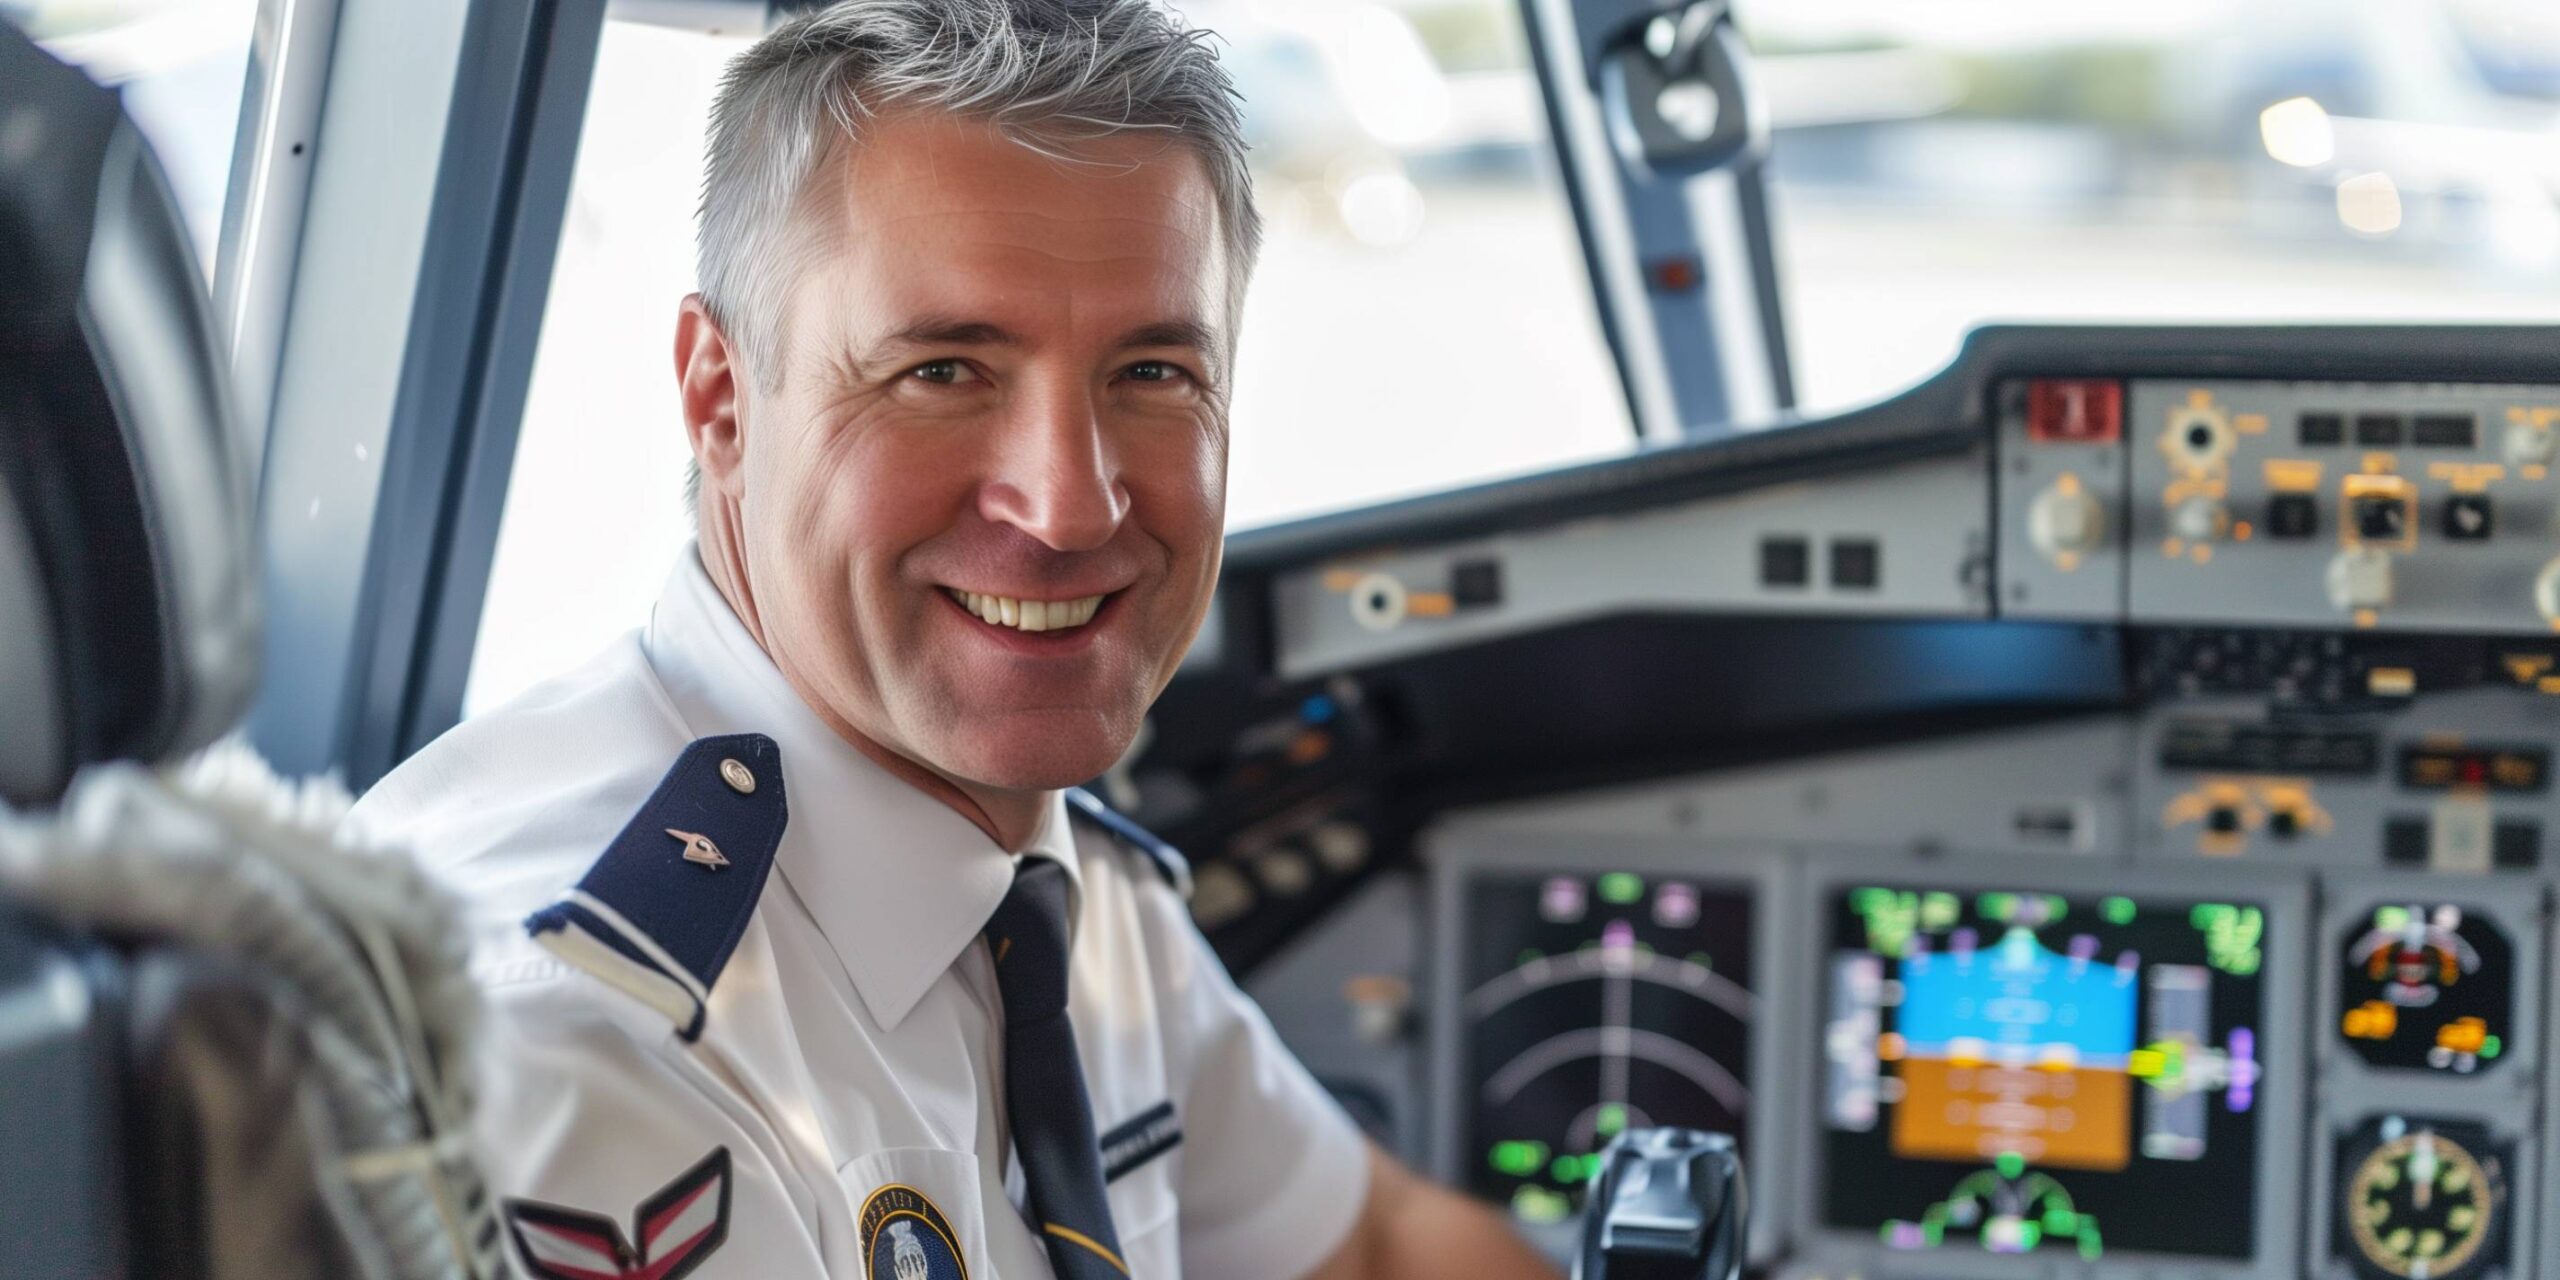 Why Pilots Are Not Allowed to Have Full Beards – A Professional Insight